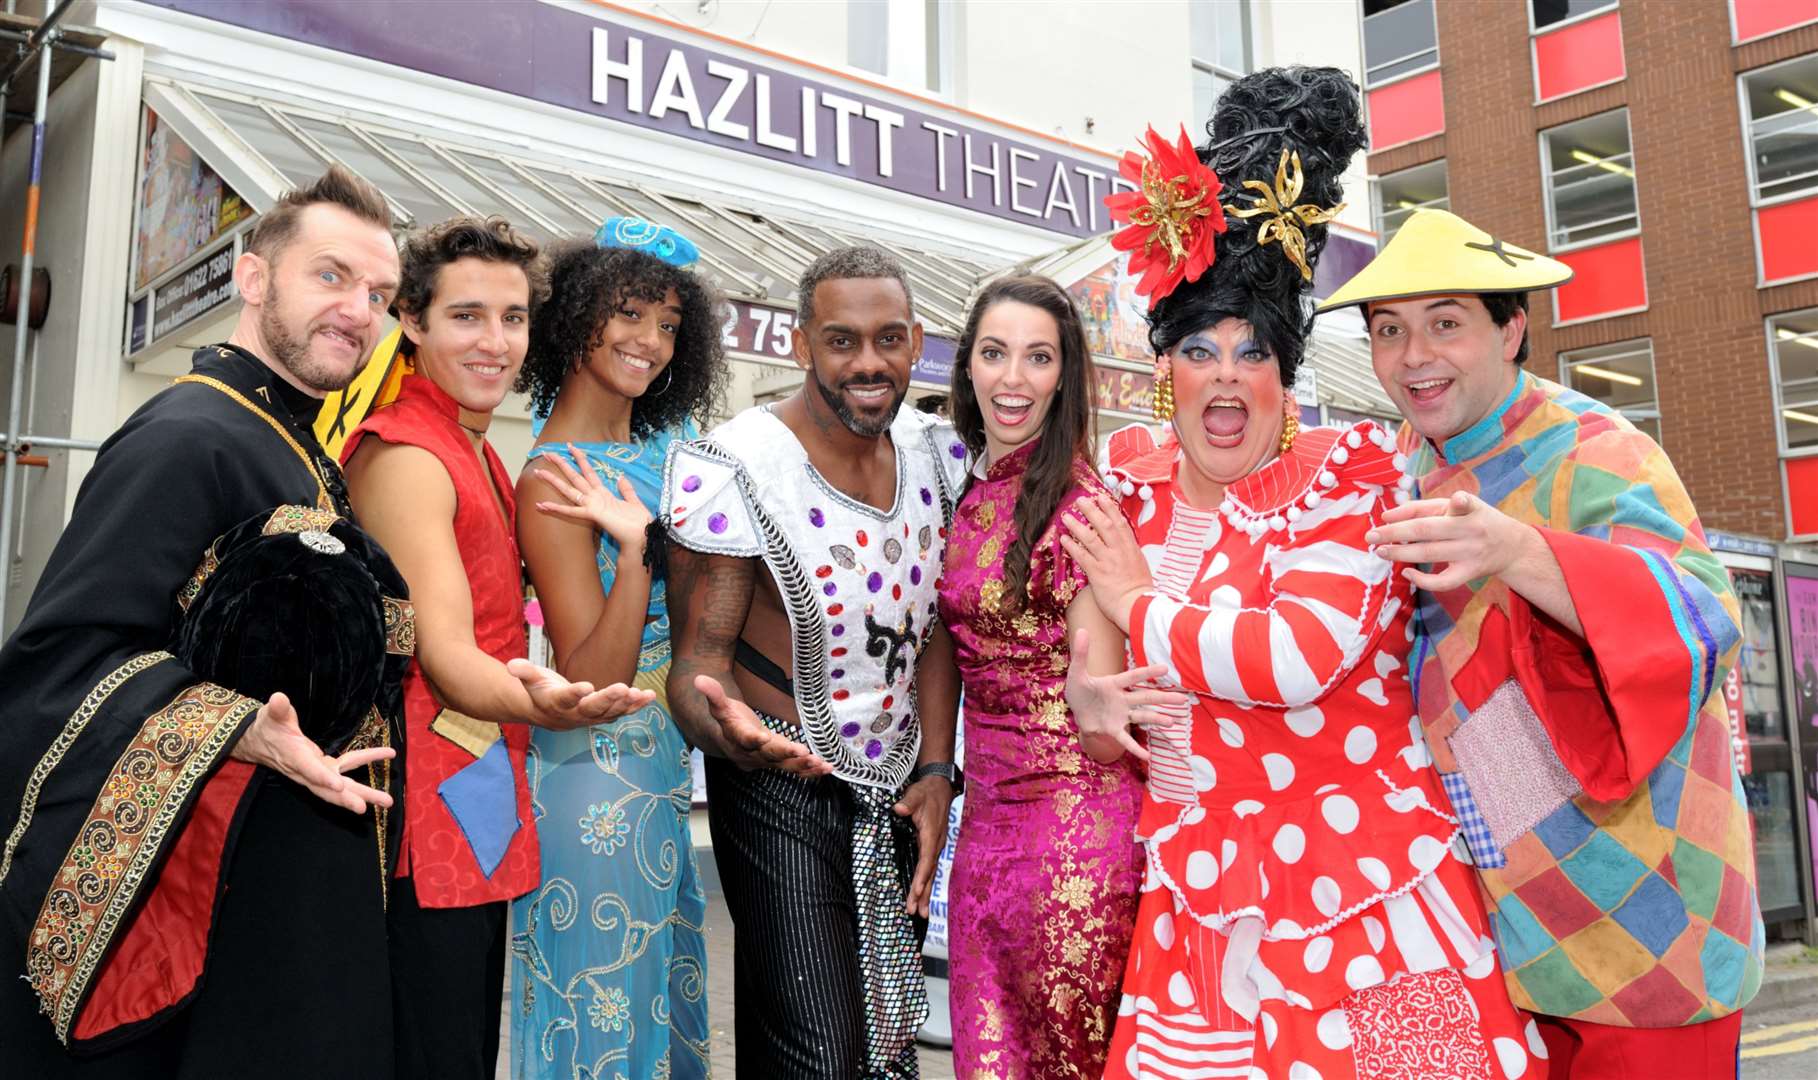 Many pantomimes have been held at the Hazlitt Theatre. Picture: Simon Hildrew